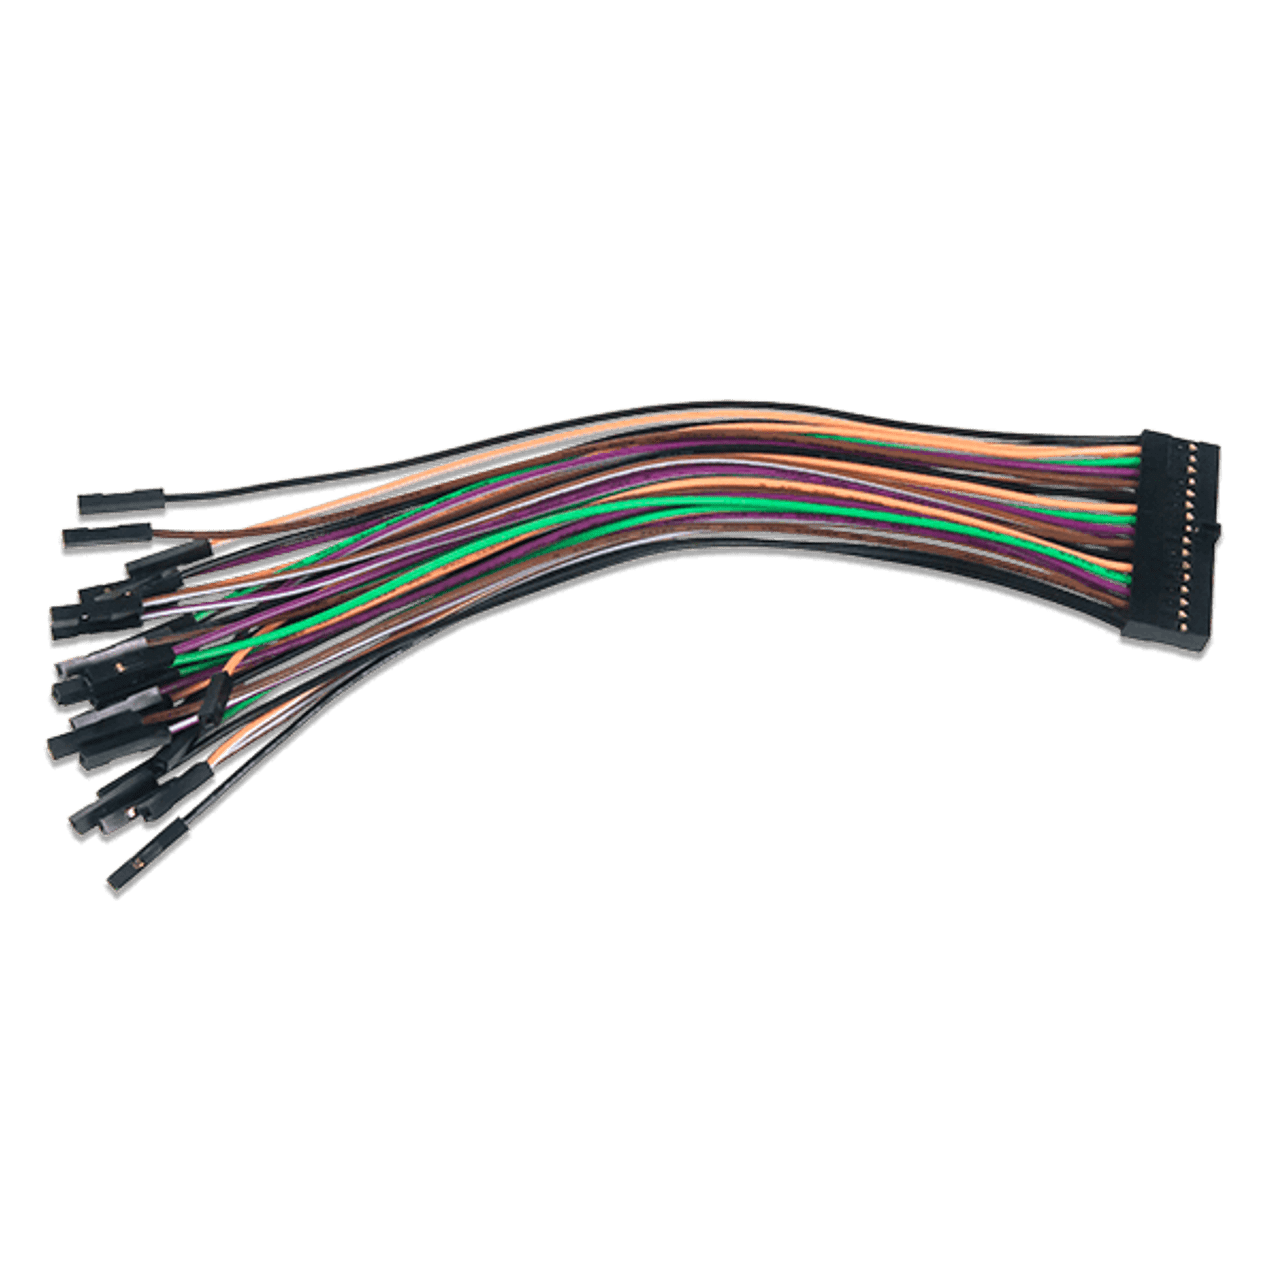 2x16 Flywires: Signal Cable Assembly for the Digital Discovery